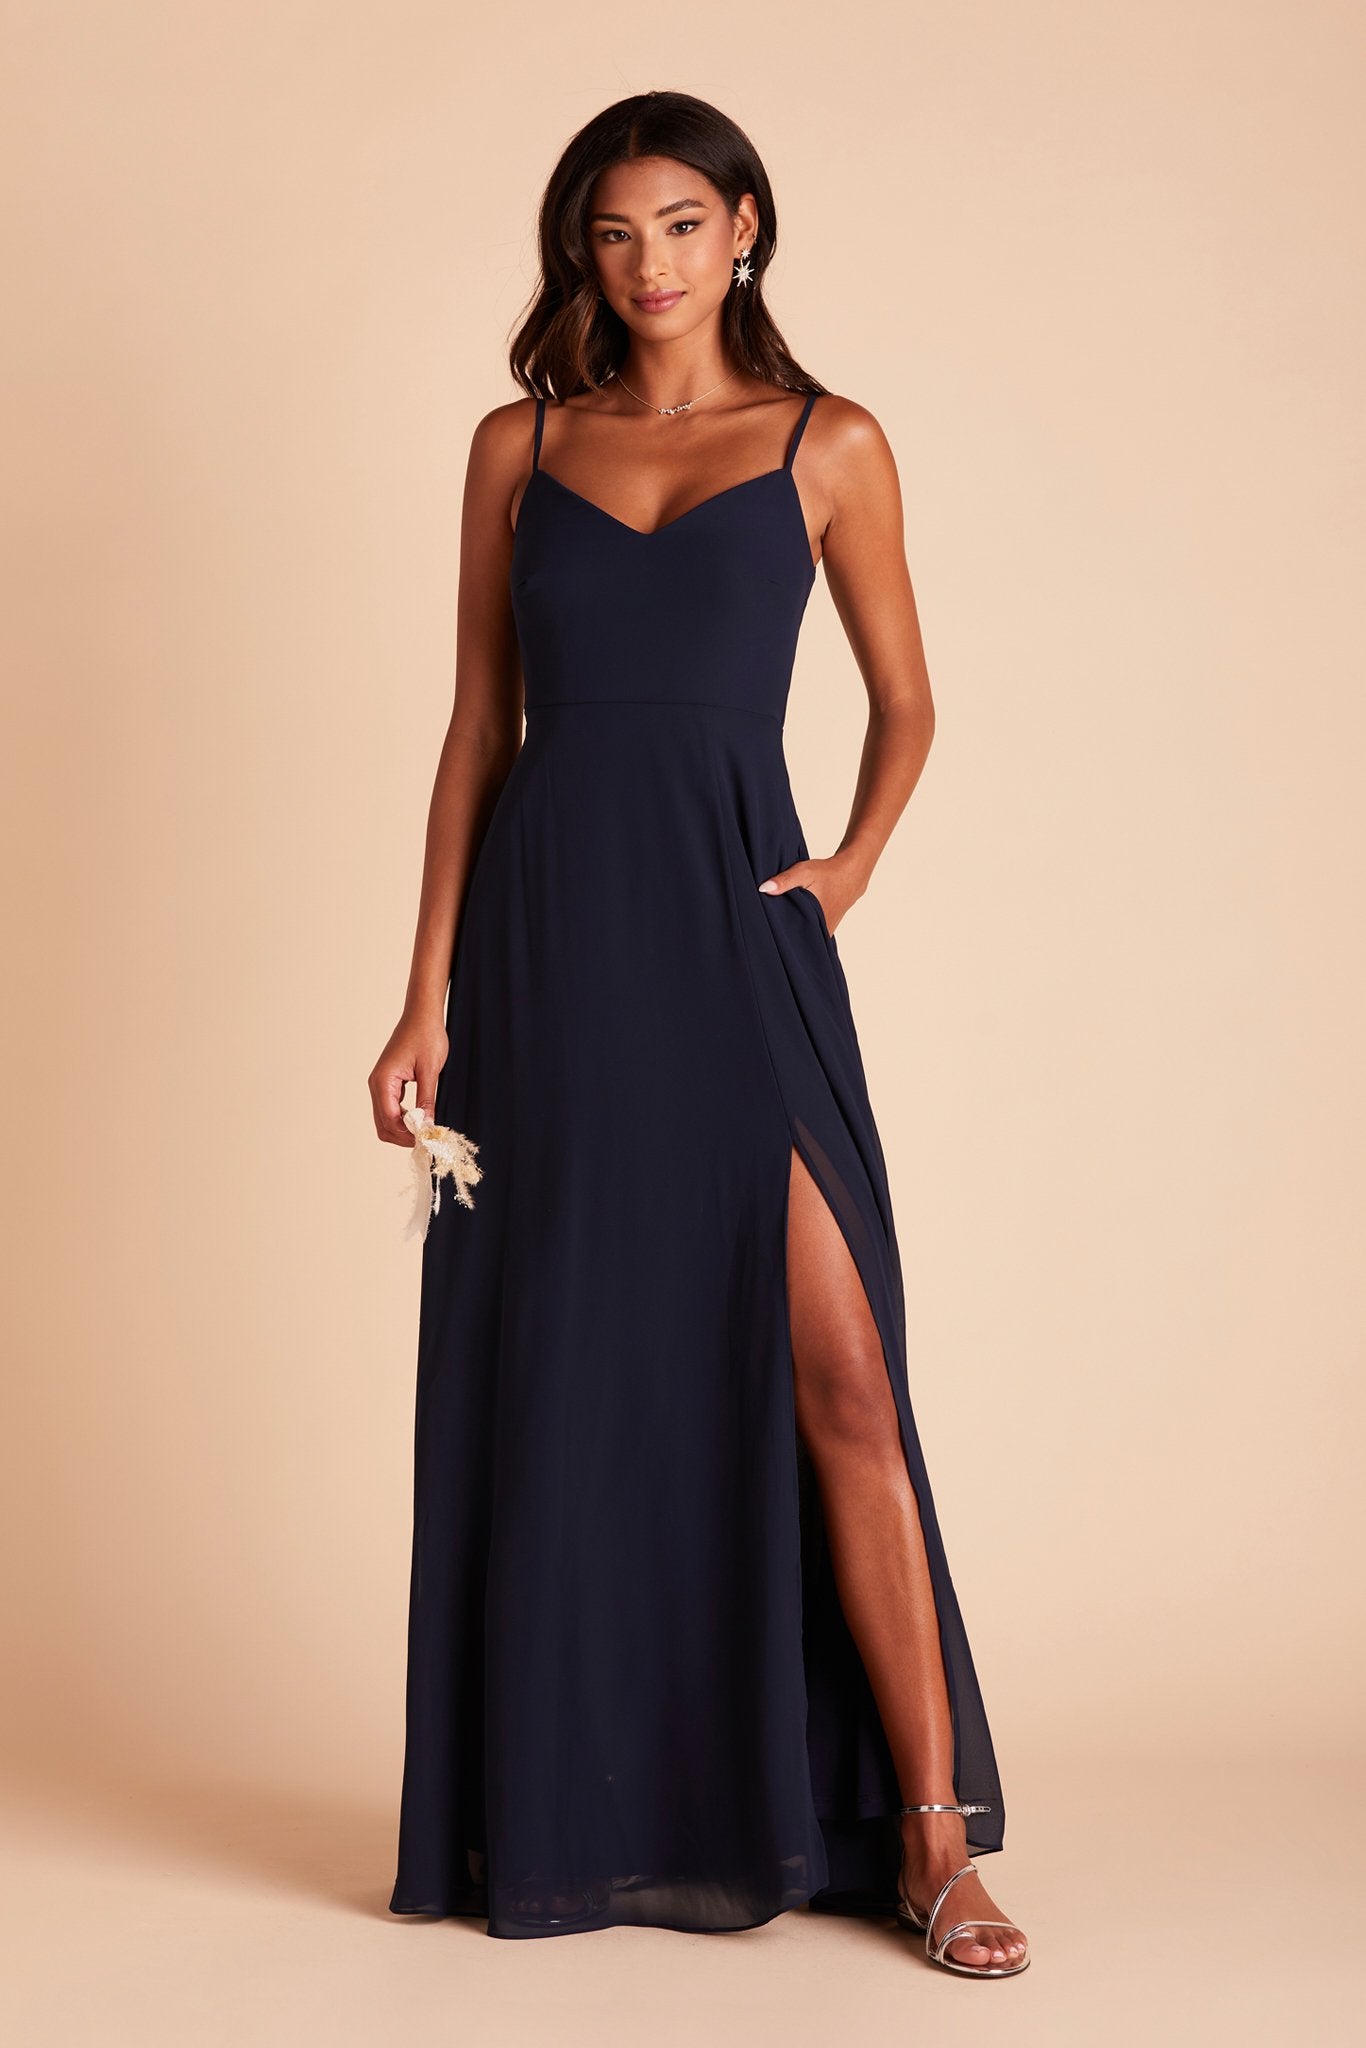 Devin convertible bridesmaid dress with slit in navy blue chiffon by Birdy Grey, front view with hand in pocket